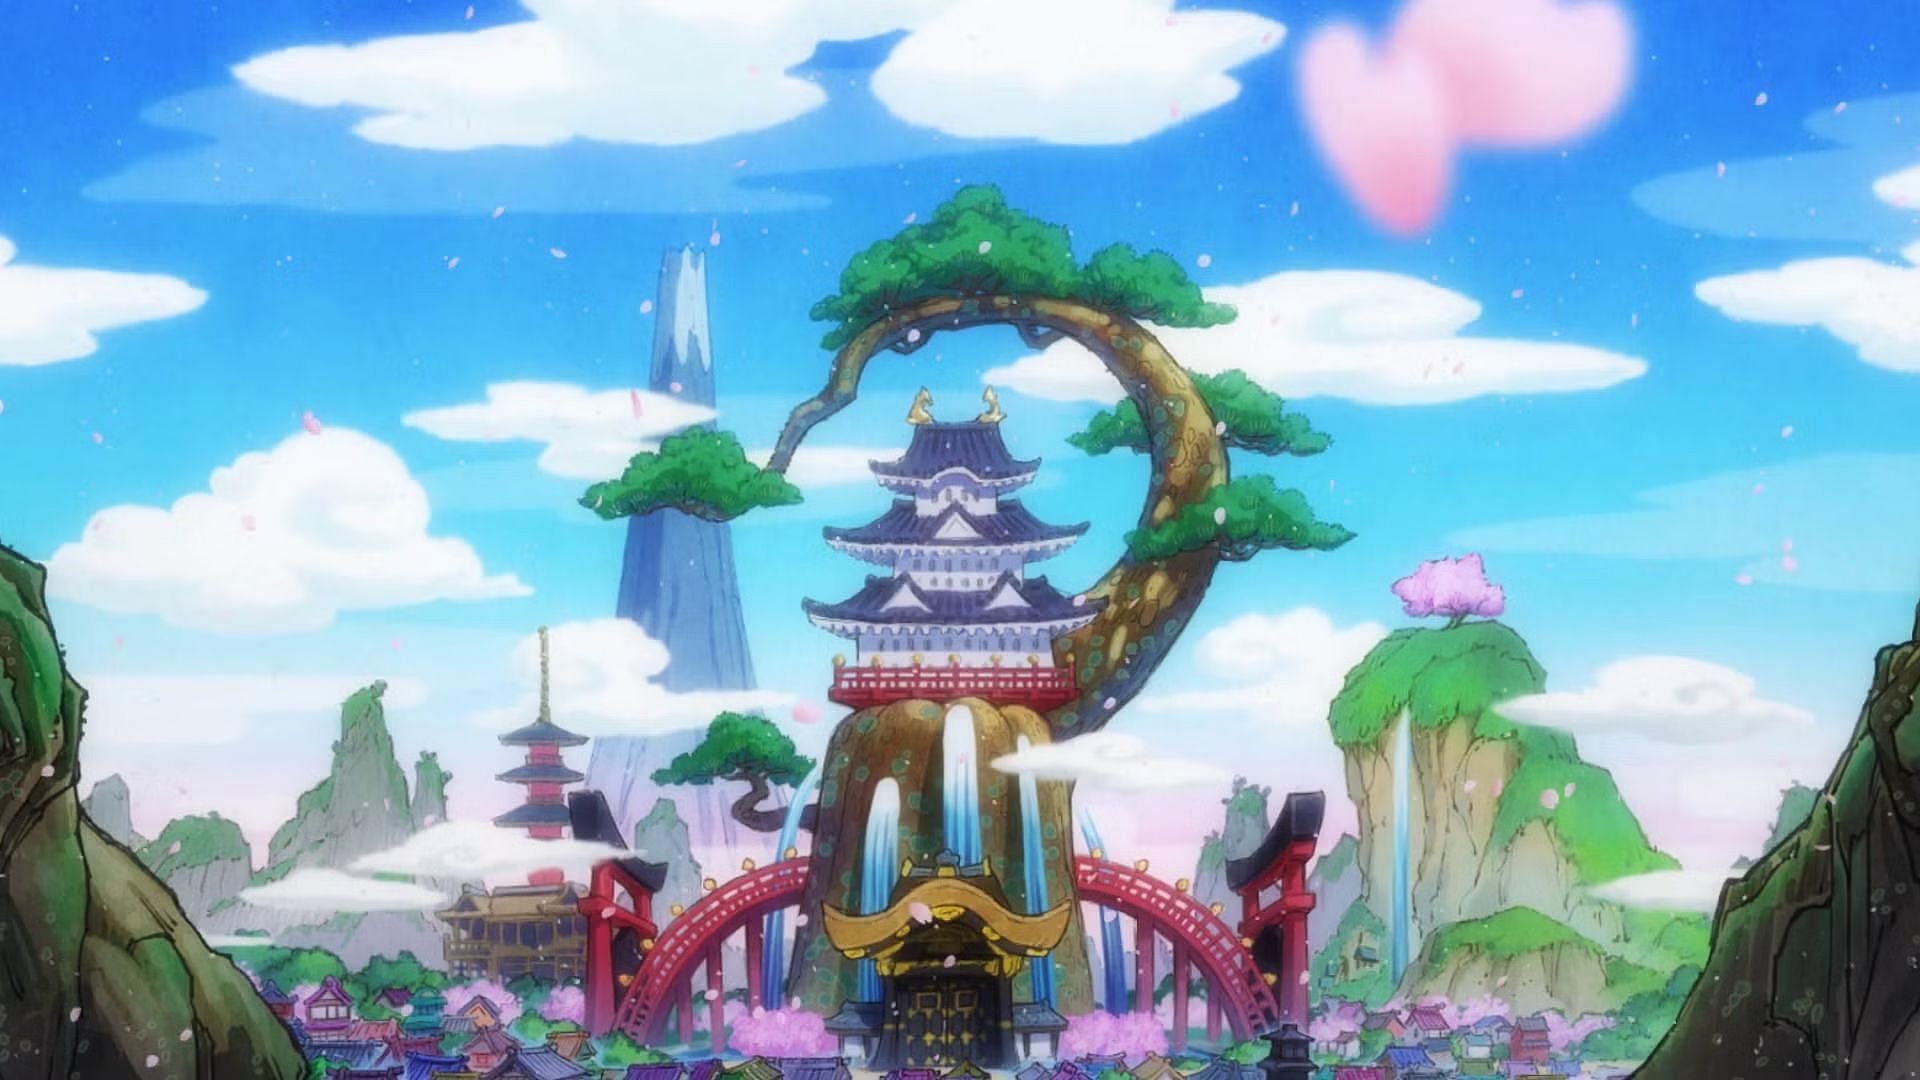 It is theorized that the One Piece world is inspired by Harlock (Image via Toei Animation)